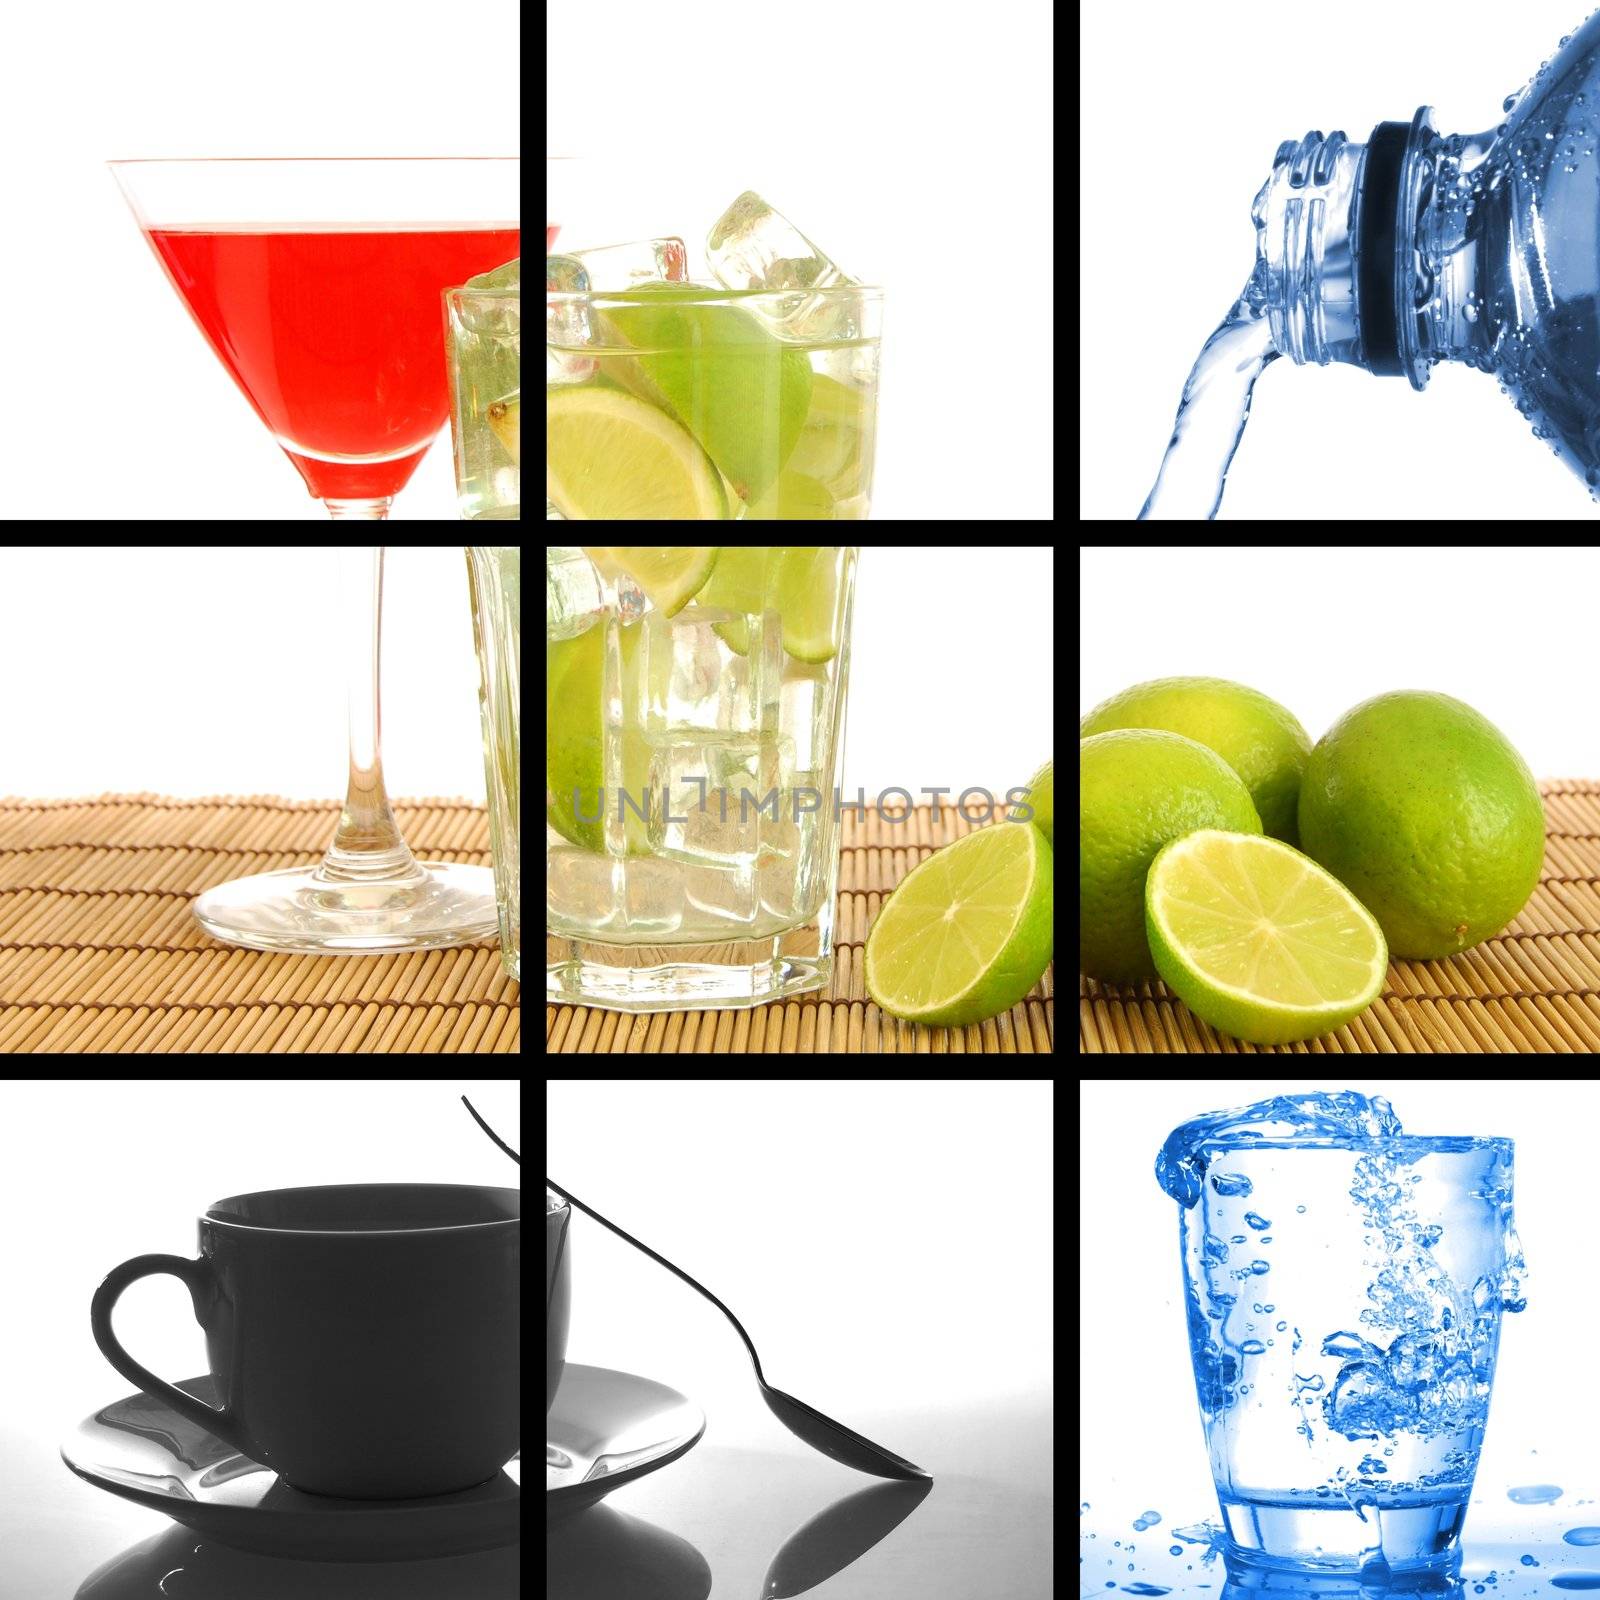 food and drink concept with collage or collection